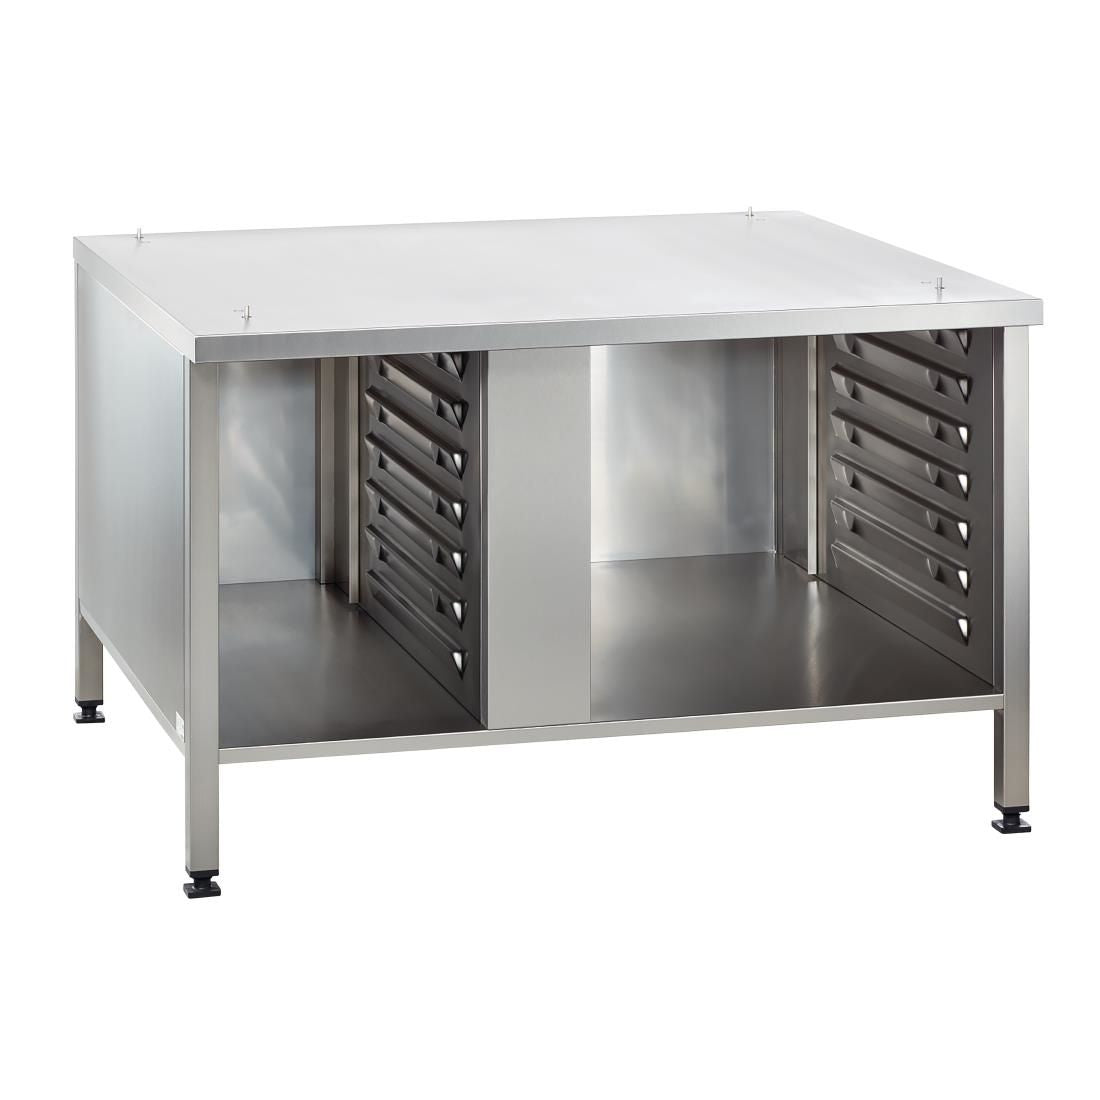 GJ822 Rational Mobile Oven Stand Ref - 60.30.340 JD Catering Equipment Solutions Ltd